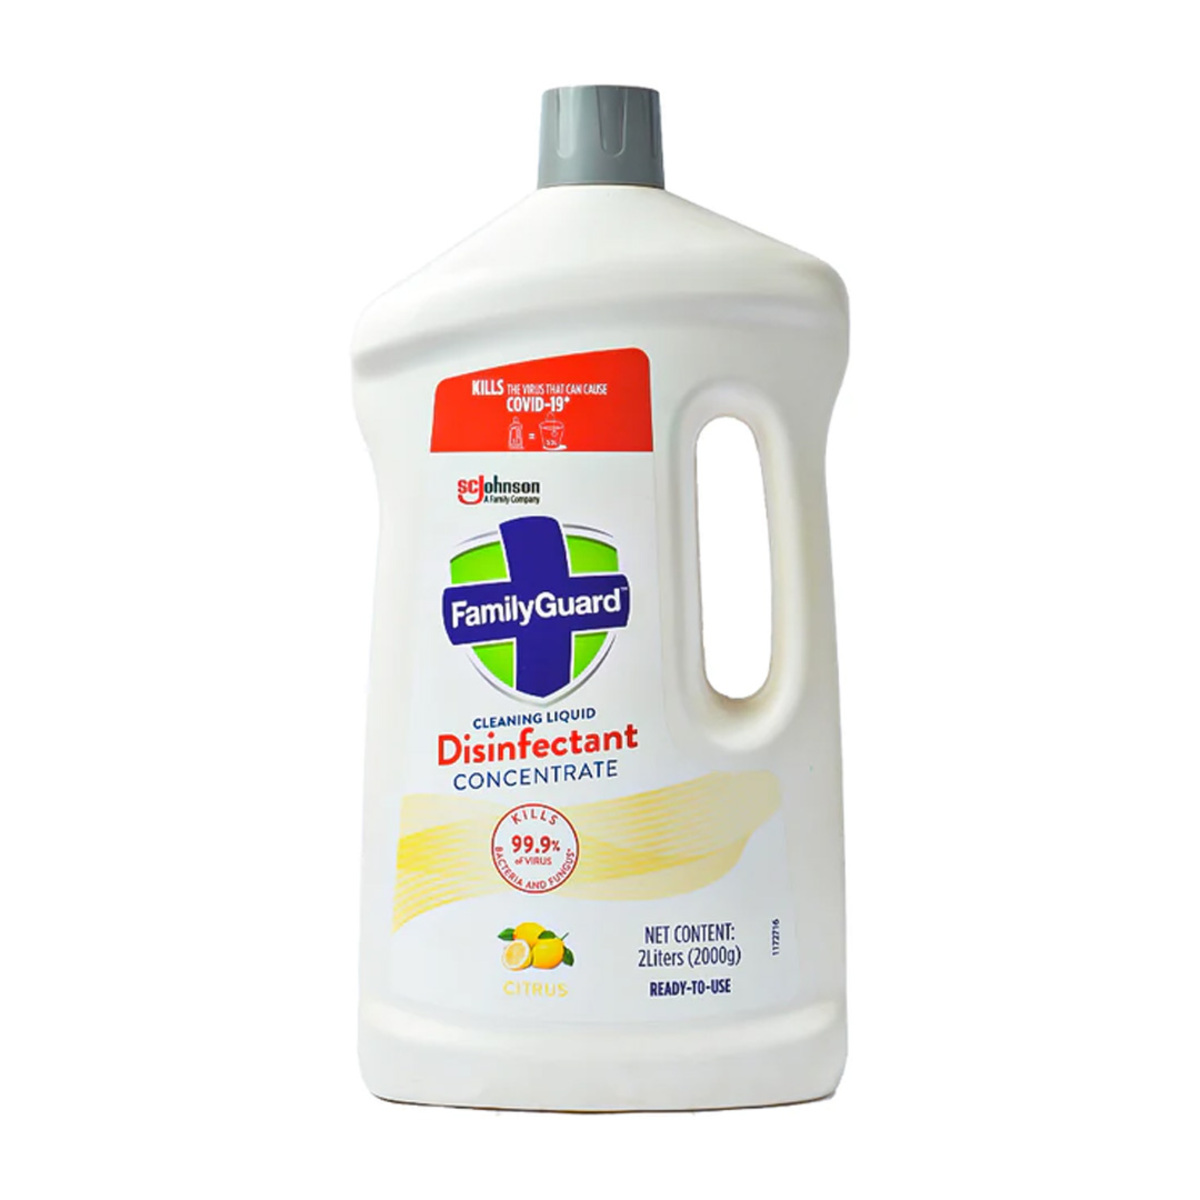 Family Guard Disinfectant Concentrate Citrus 2Liter